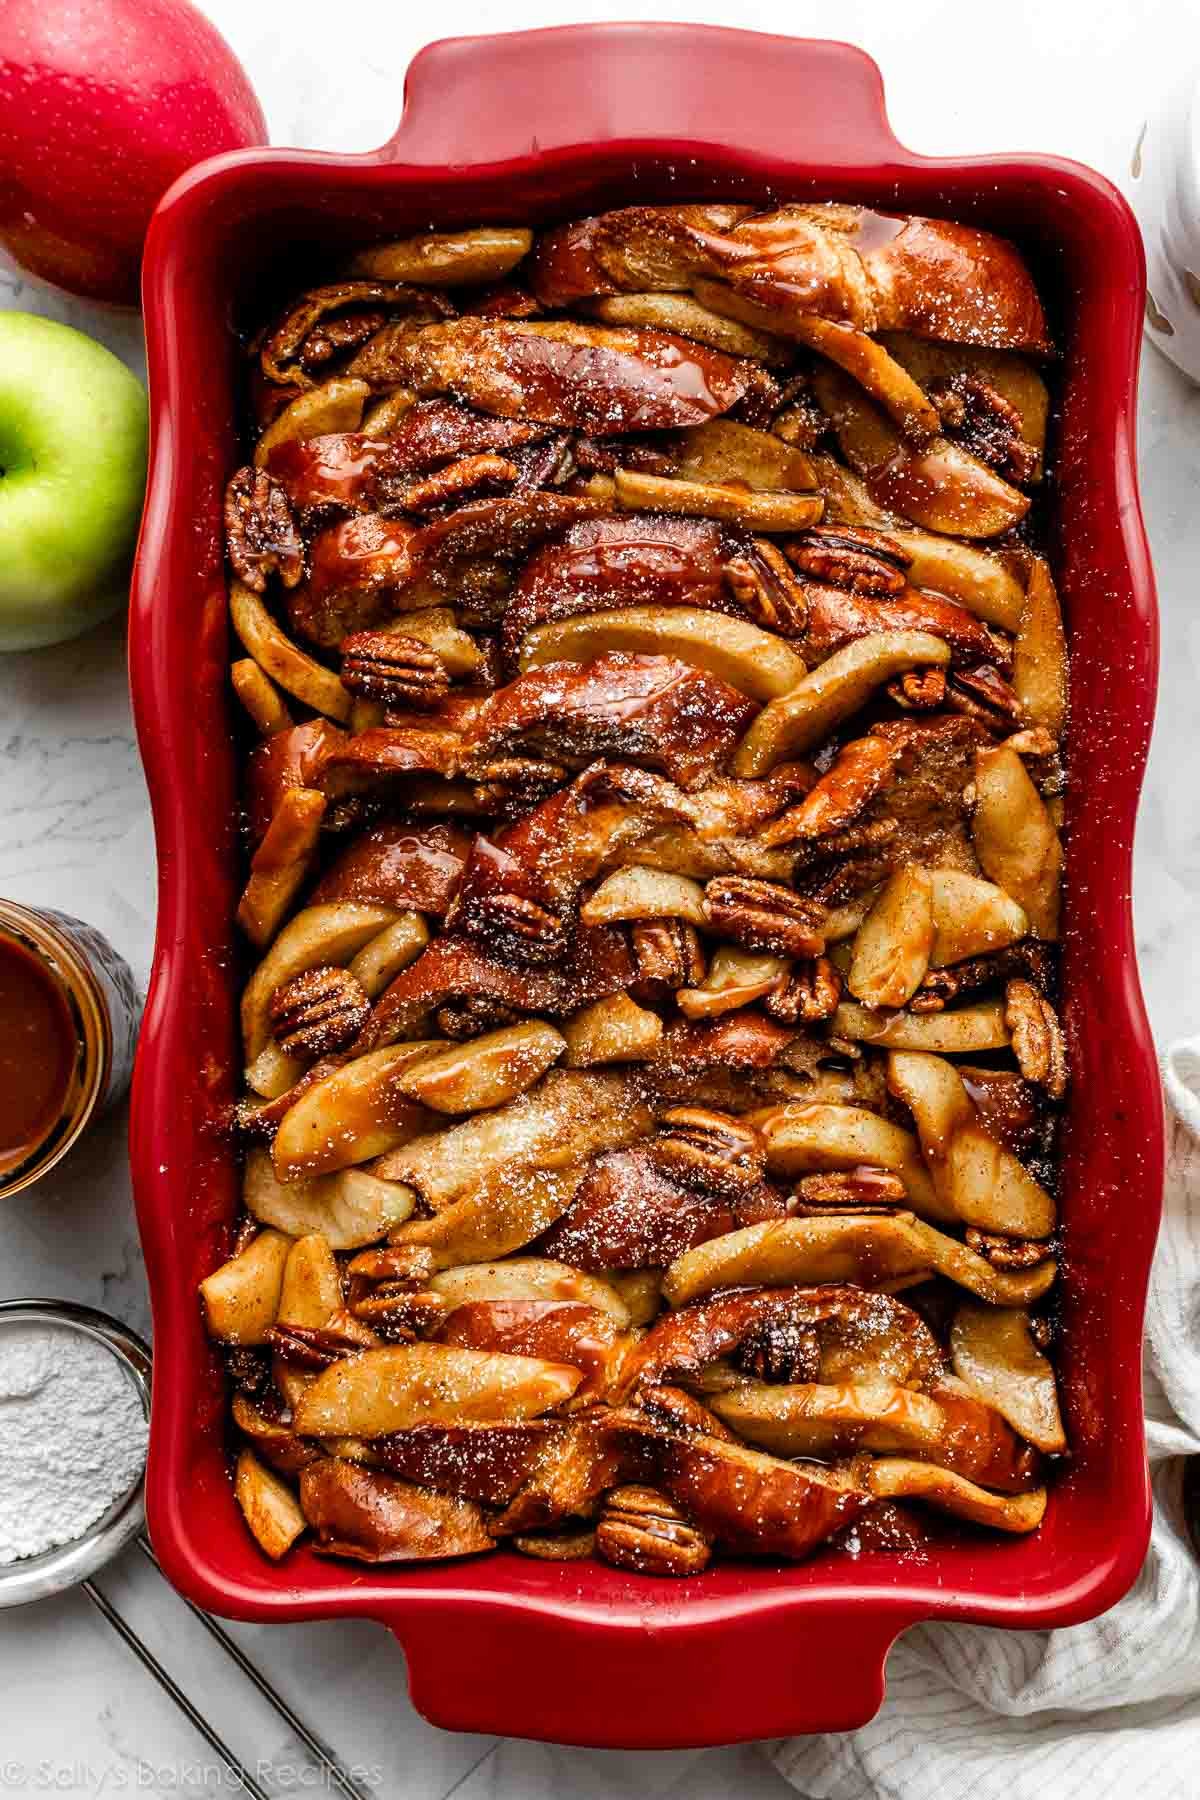 baked apple cider french toast in red casserole dish.